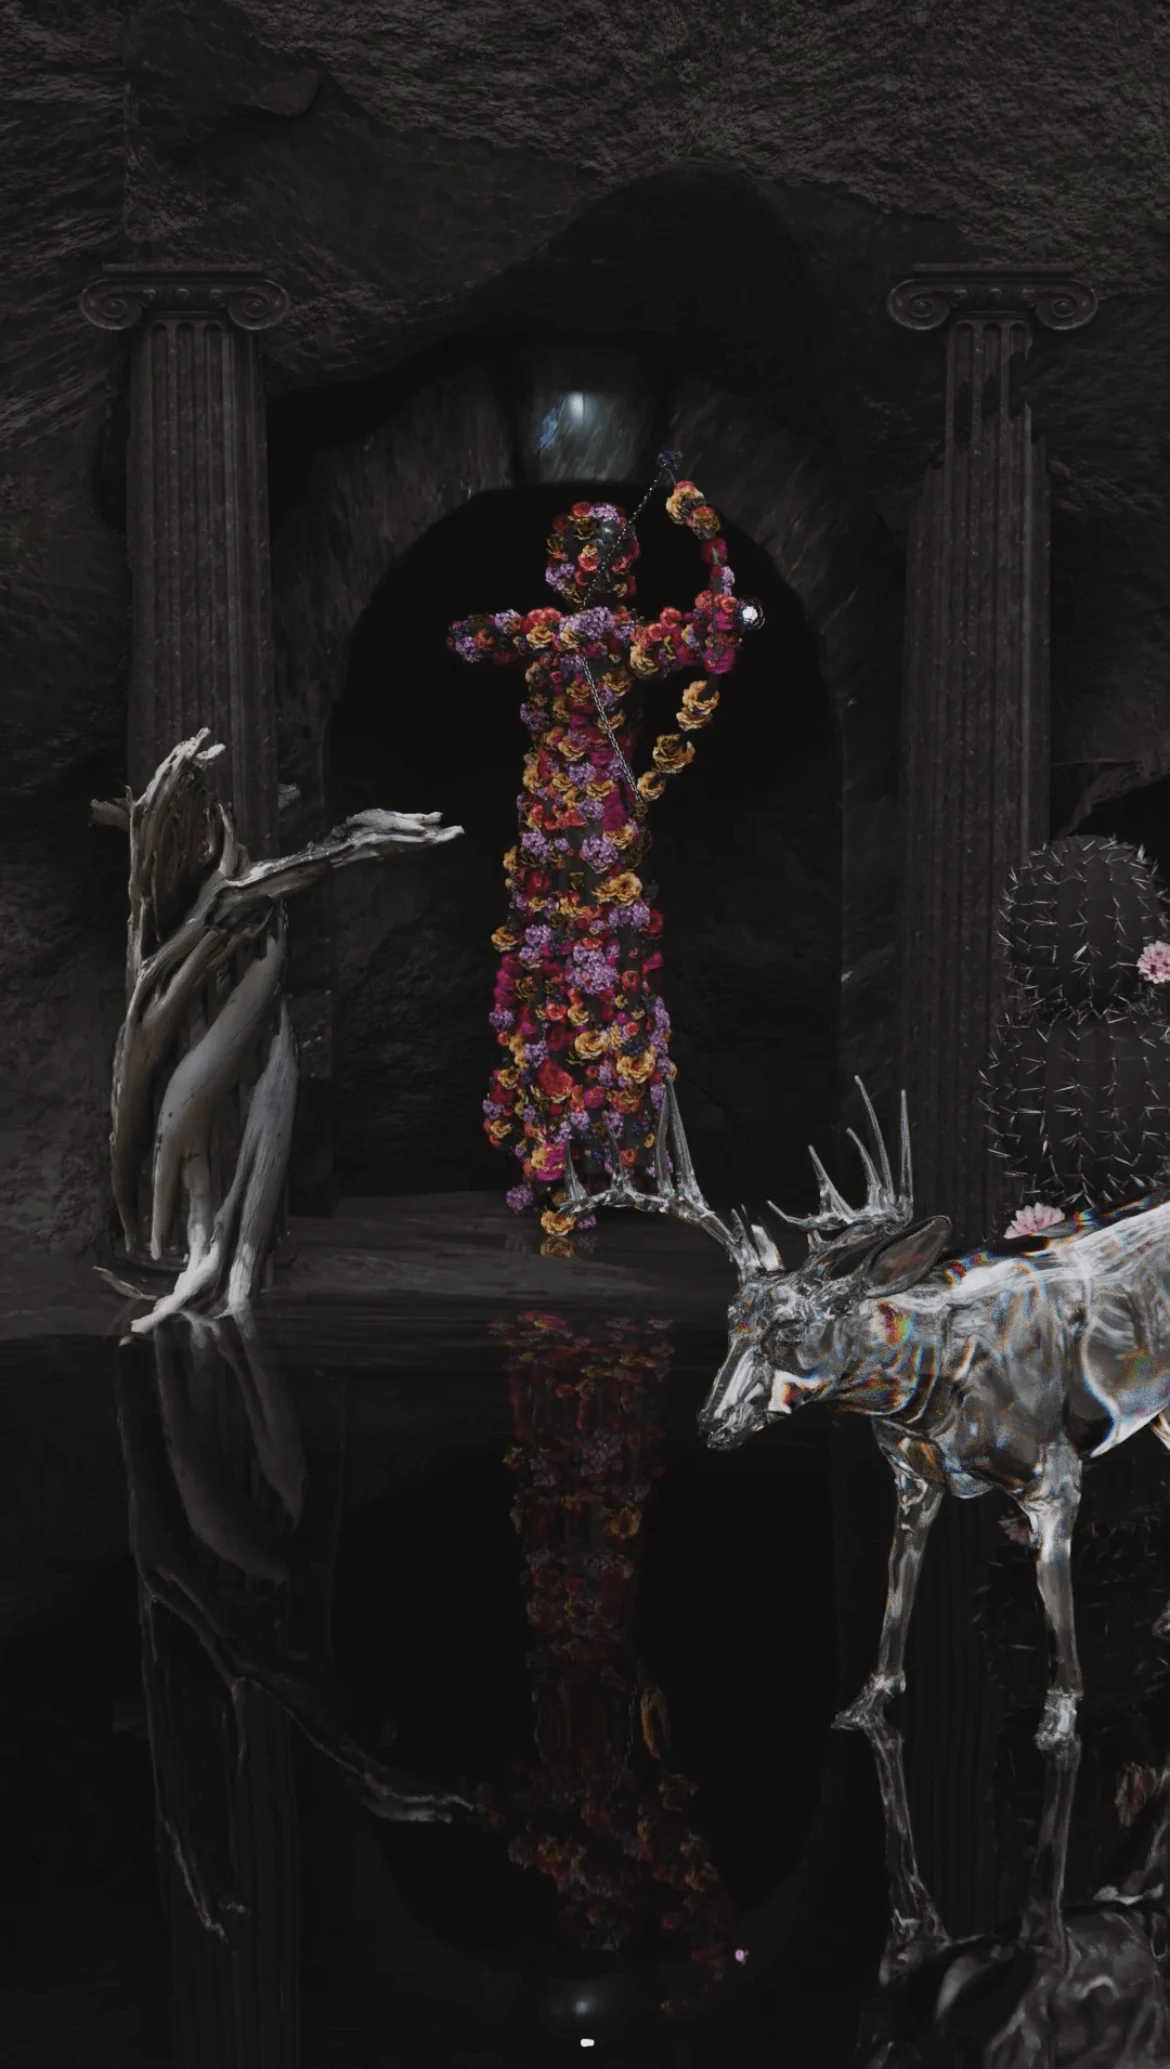 A digitally-rendered image of a figure made of flowers, holding a bow and arrow and pointing it at some statues of animals that surround them.